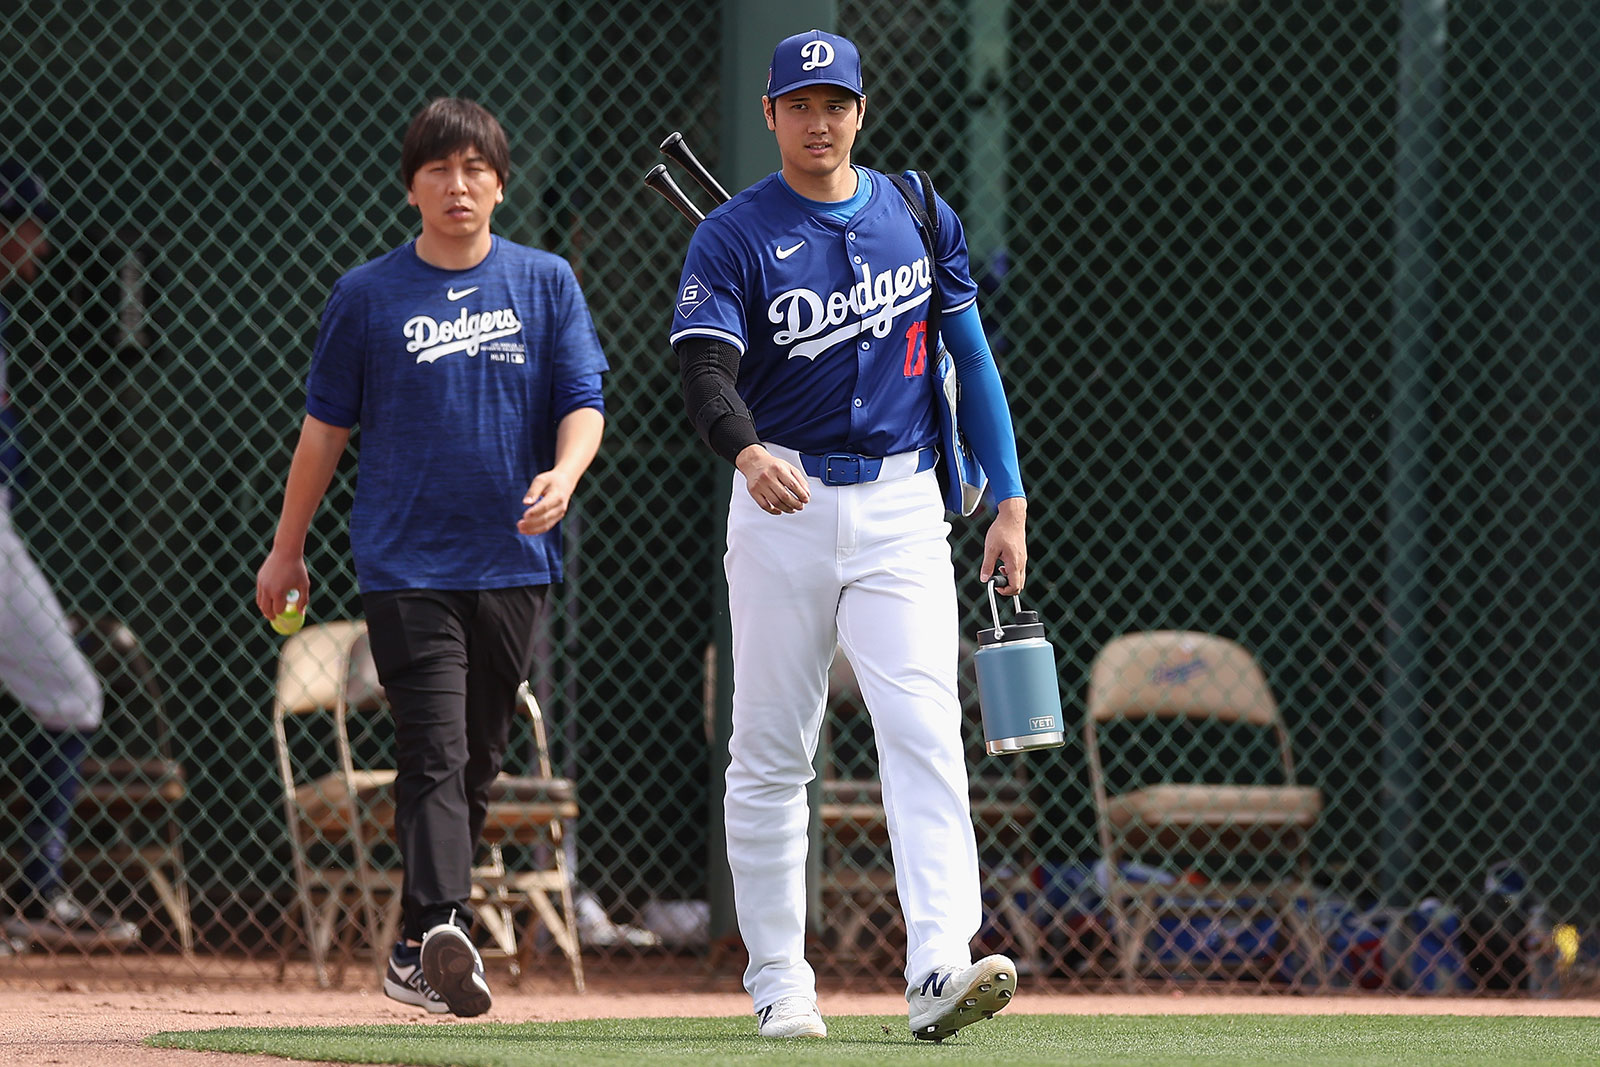 Shohei Ohtani, right, of the Los Angeles Dodgers and interpreter Ippei Mizuhara arrive to a game February 27 in Glendale, Arizona. 